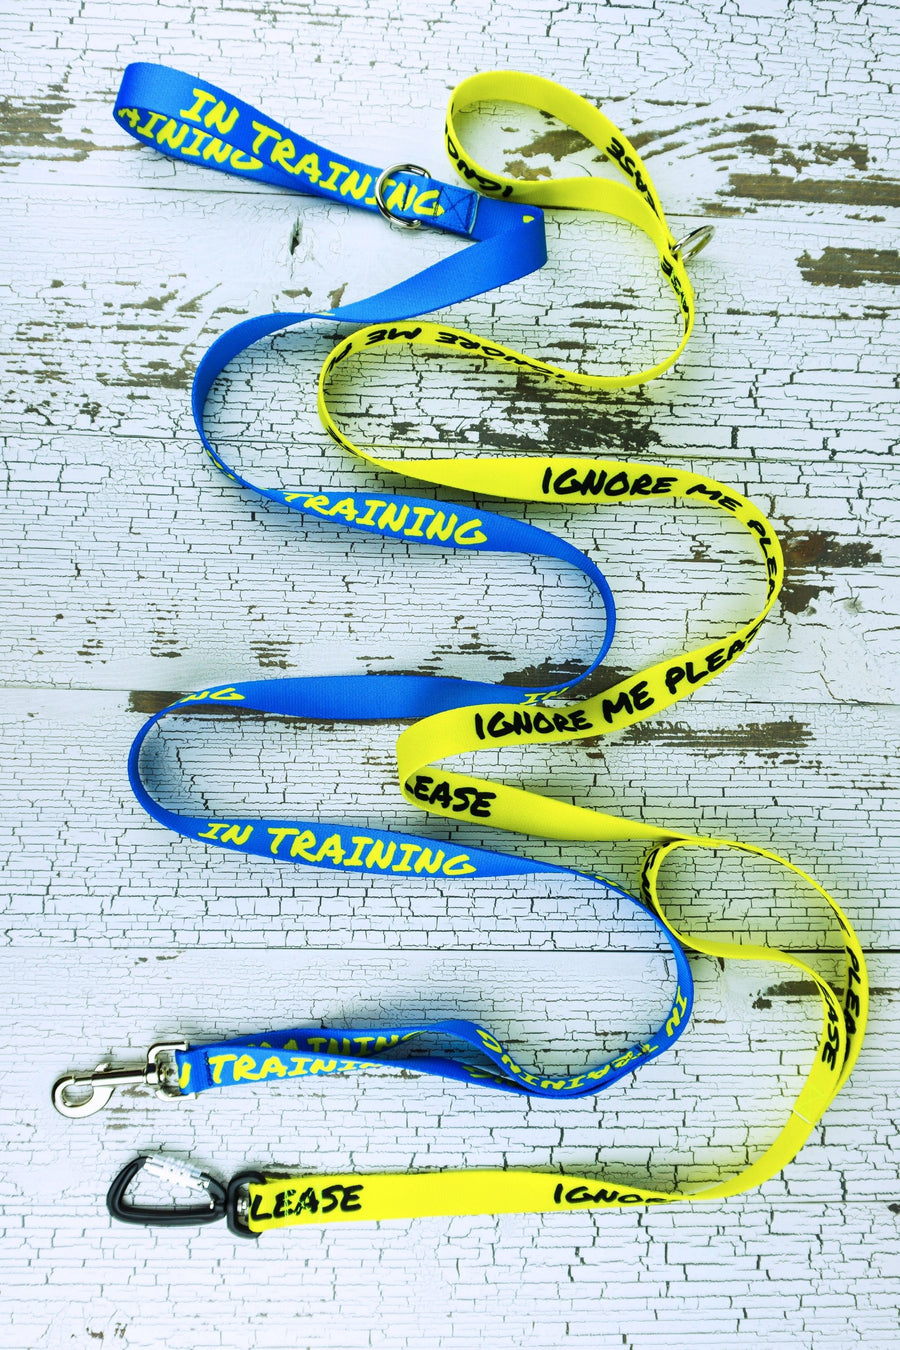 Handheld leashes with traffic handle shown in the safety message webbing, including in training in blue with a swivel snap bolt and the ignore me please in yellow with a carabiner.